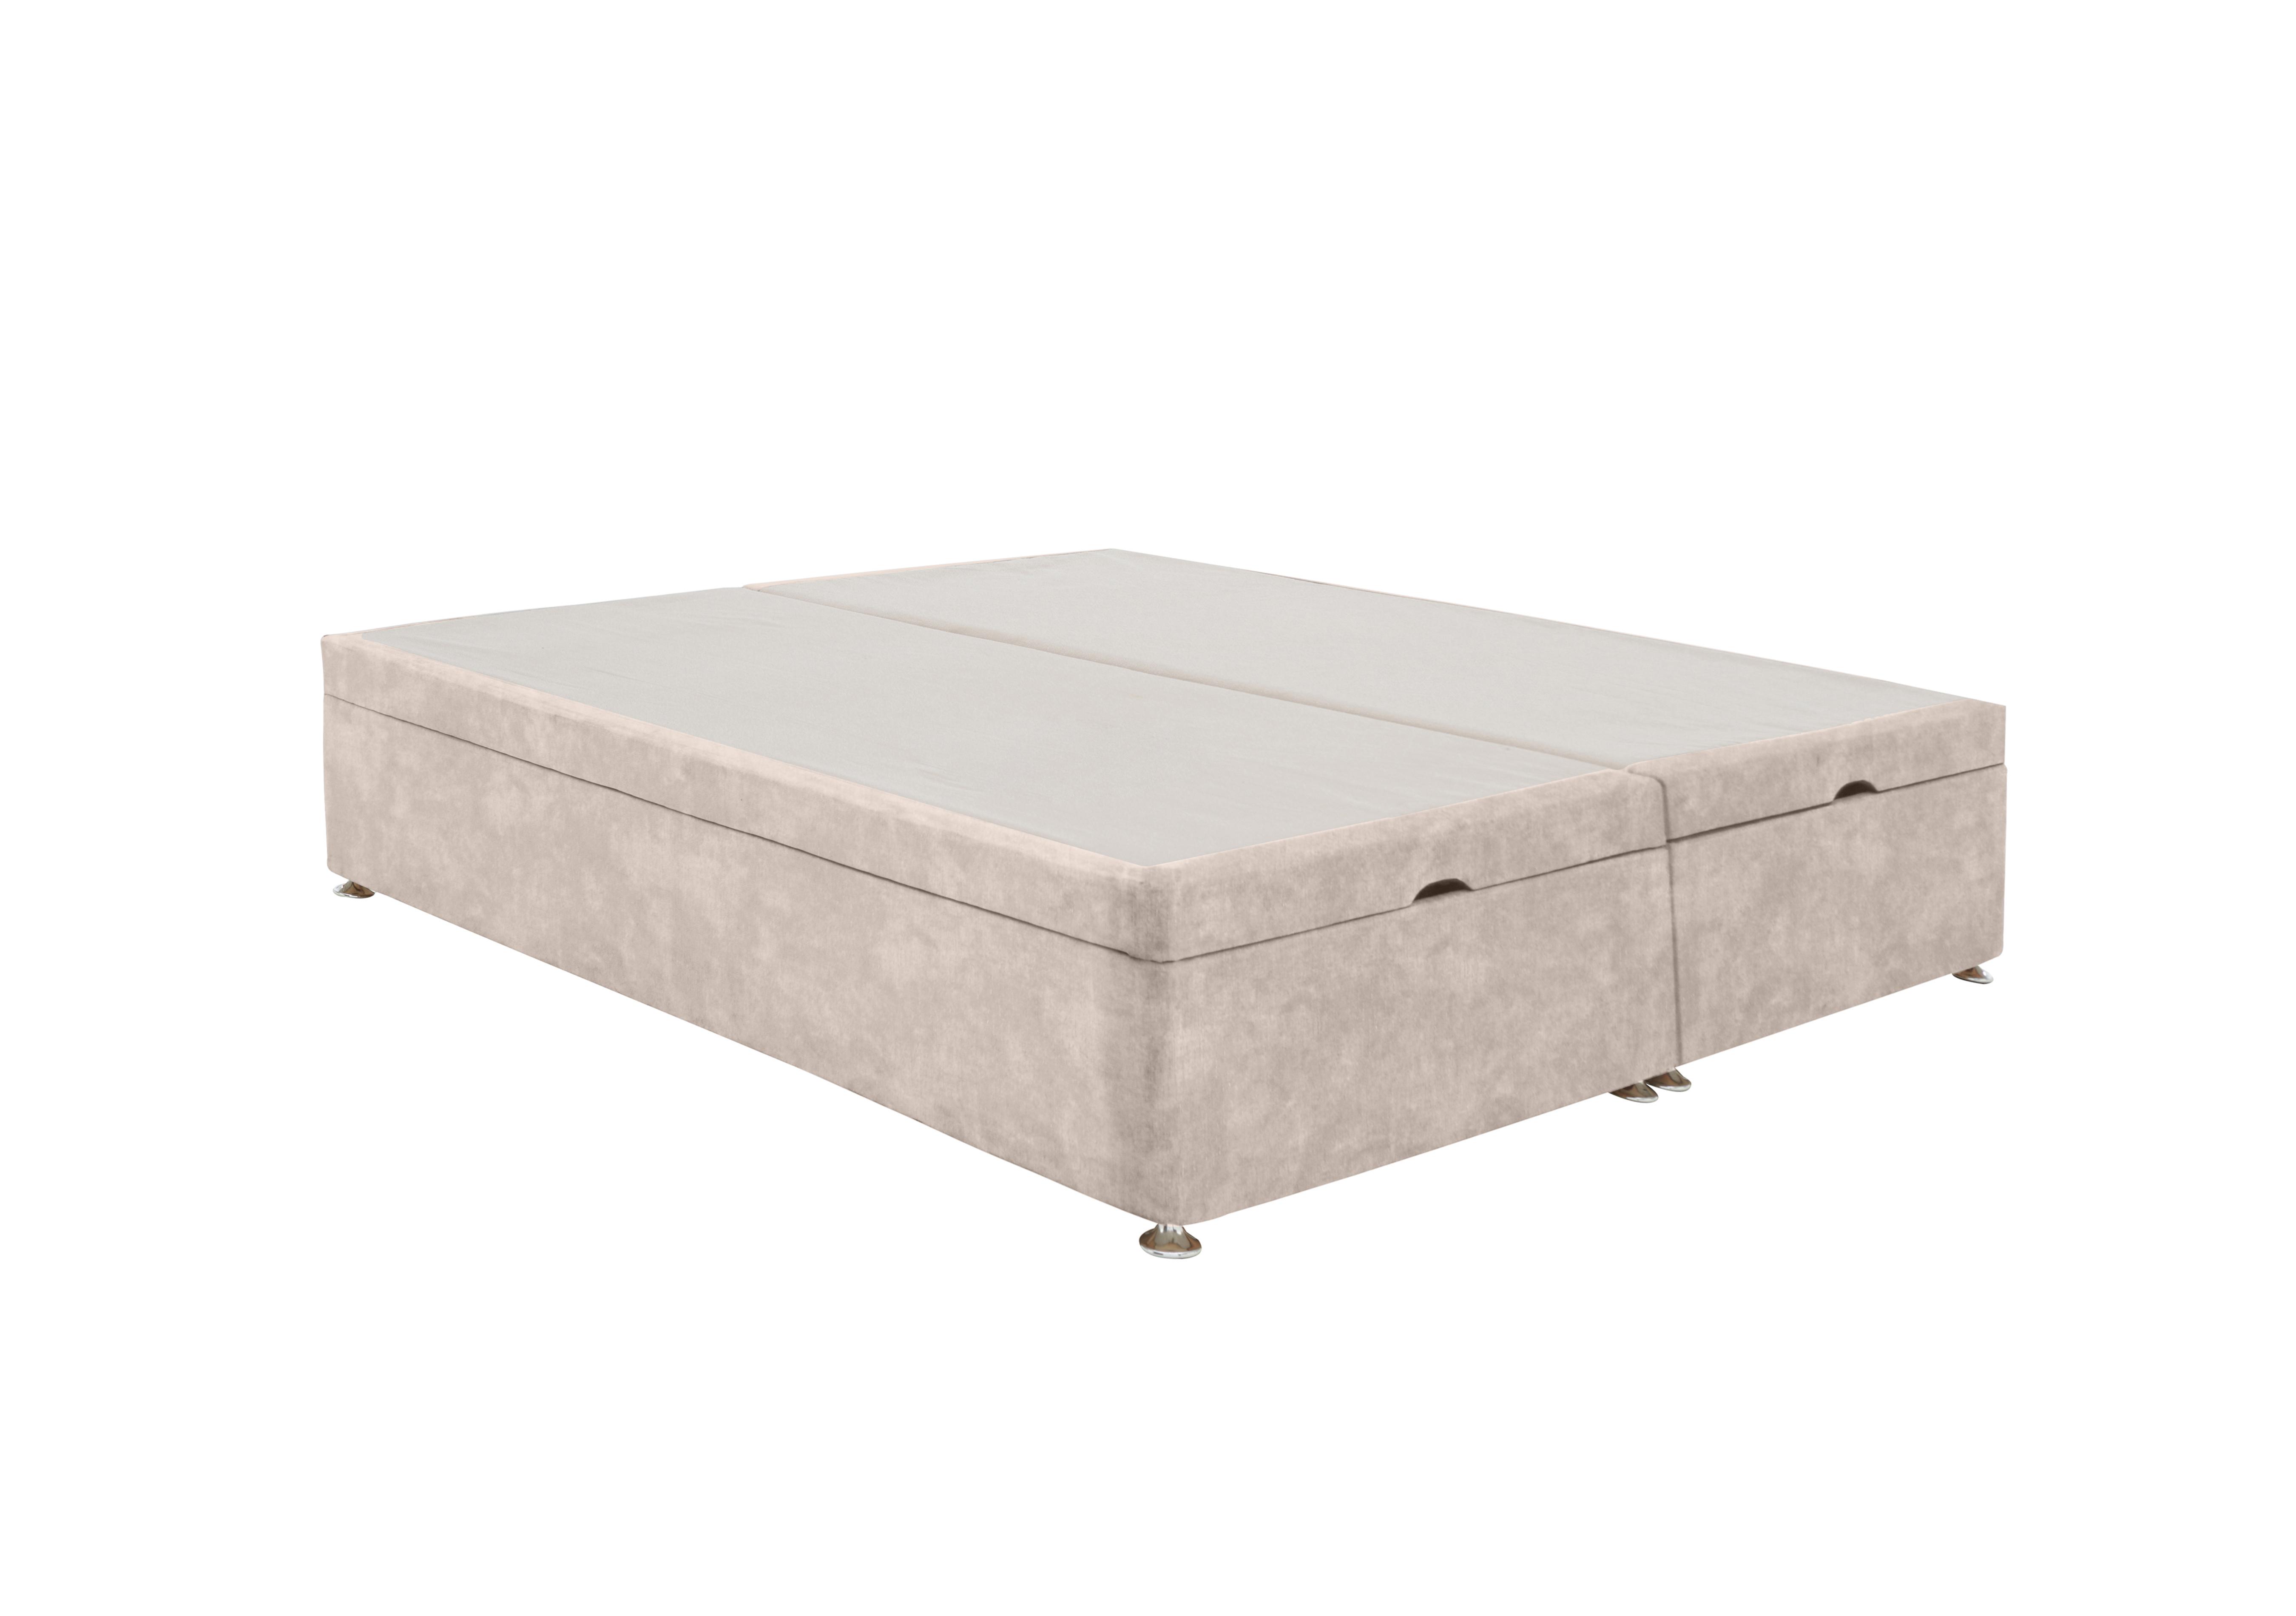 End-lift Ottoman Divan Base in Lace Ivory on Furniture Village